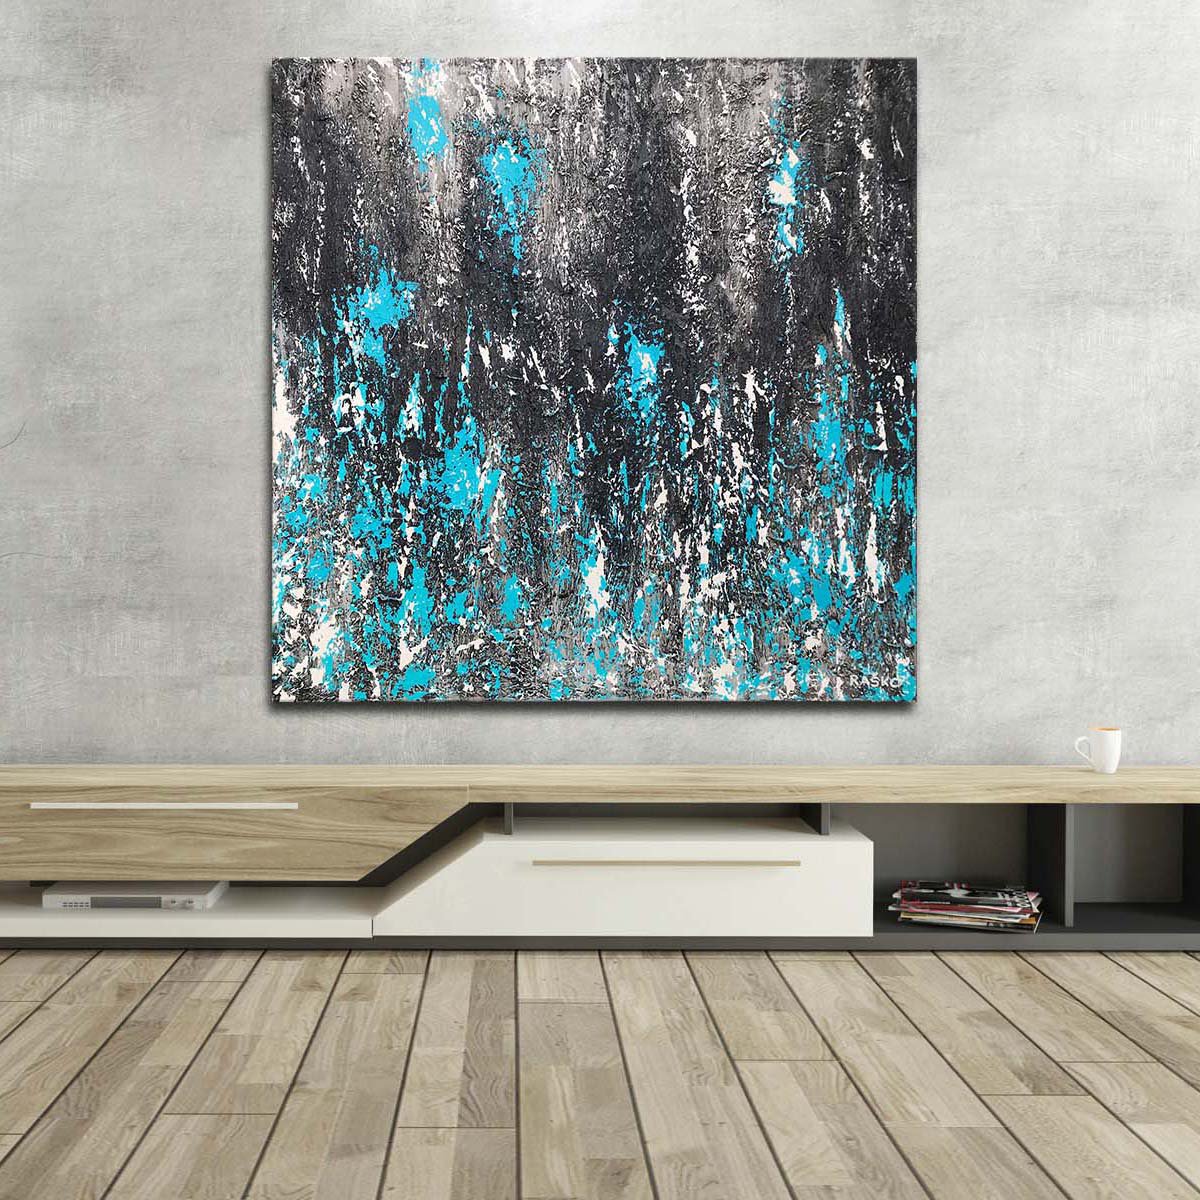 DETERMINED - Highly textured Brown & Teal abstract painting 100cm x 100cm - 2020 - READY T... by Rasko